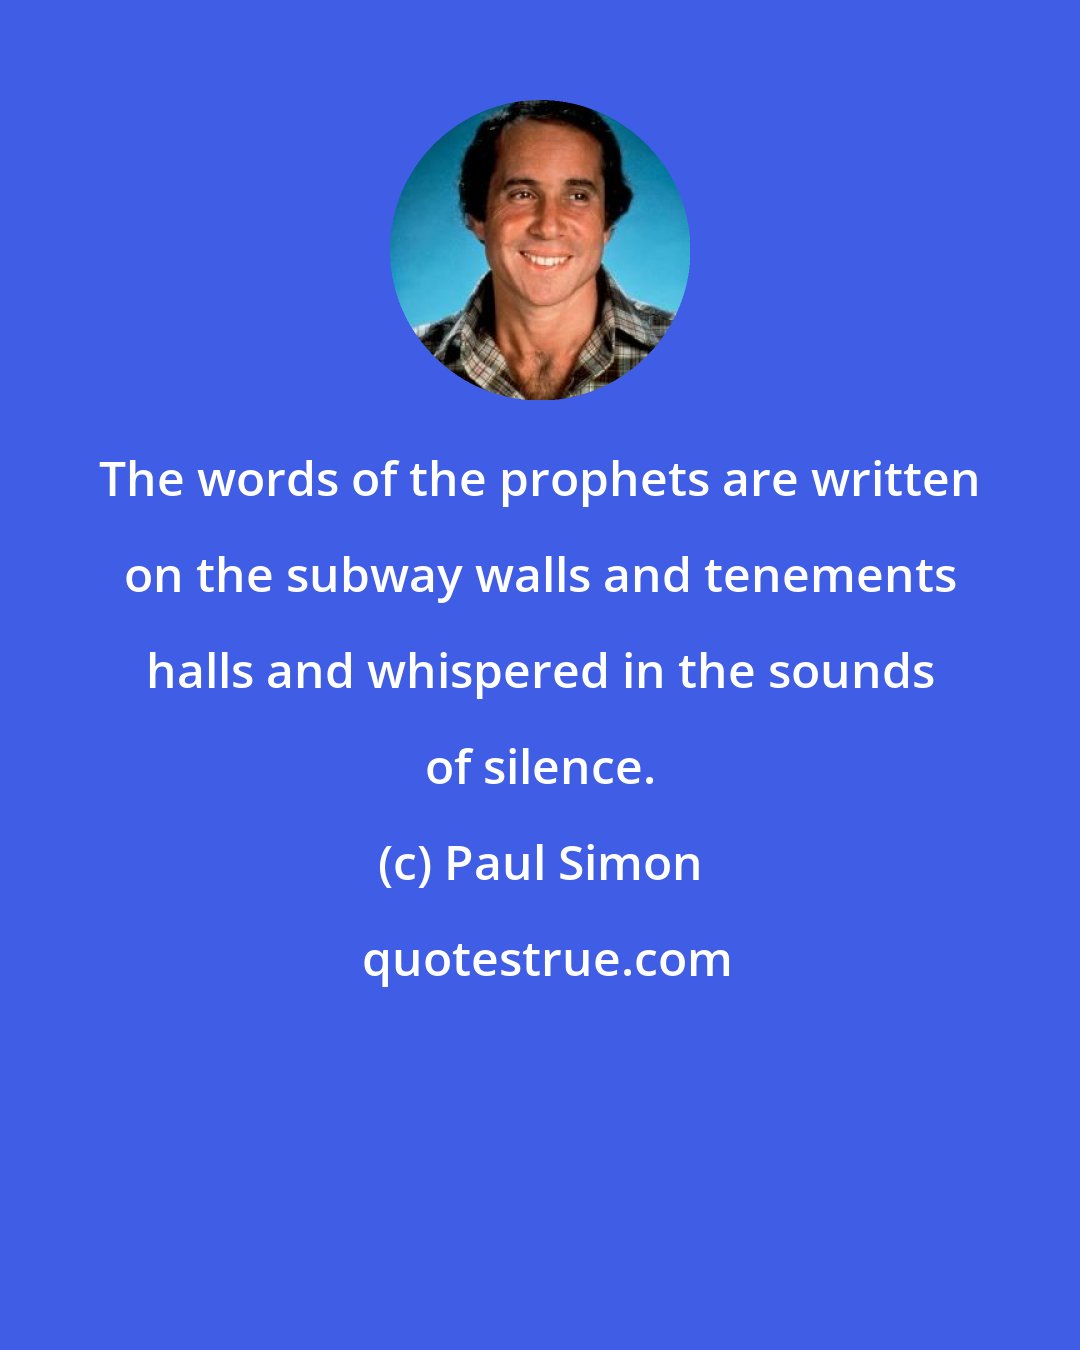 Paul Simon: The words of the prophets are written on the subway walls and tenements halls and whispered in the sounds of silence.